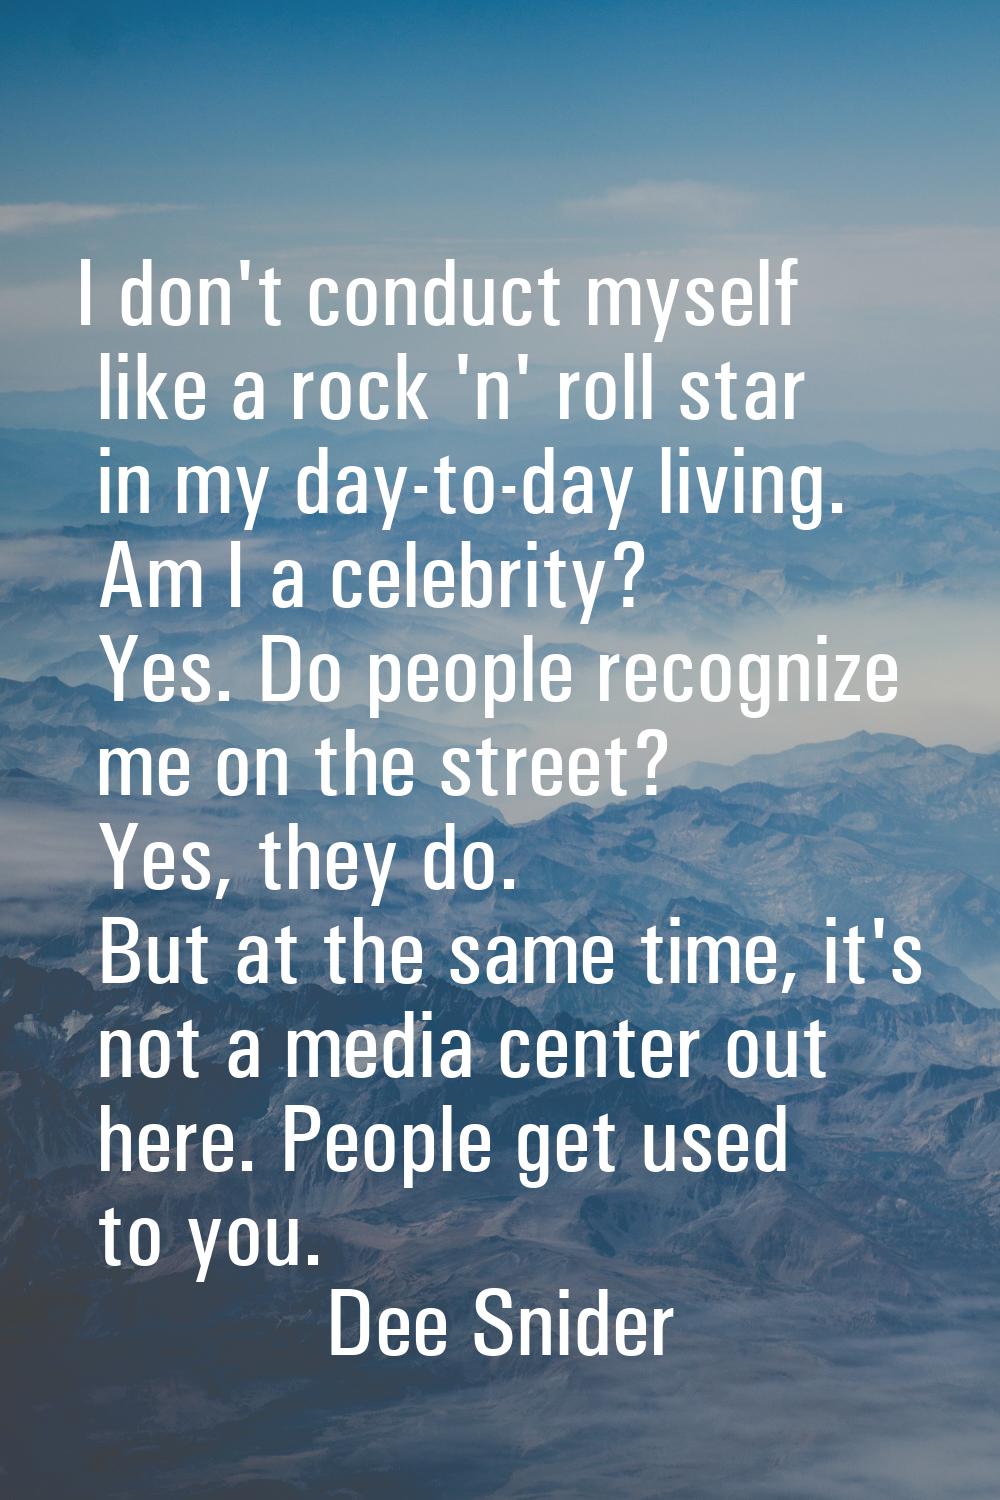 I don't conduct myself like a rock 'n' roll star in my day-to-day living. Am I a celebrity? Yes. Do